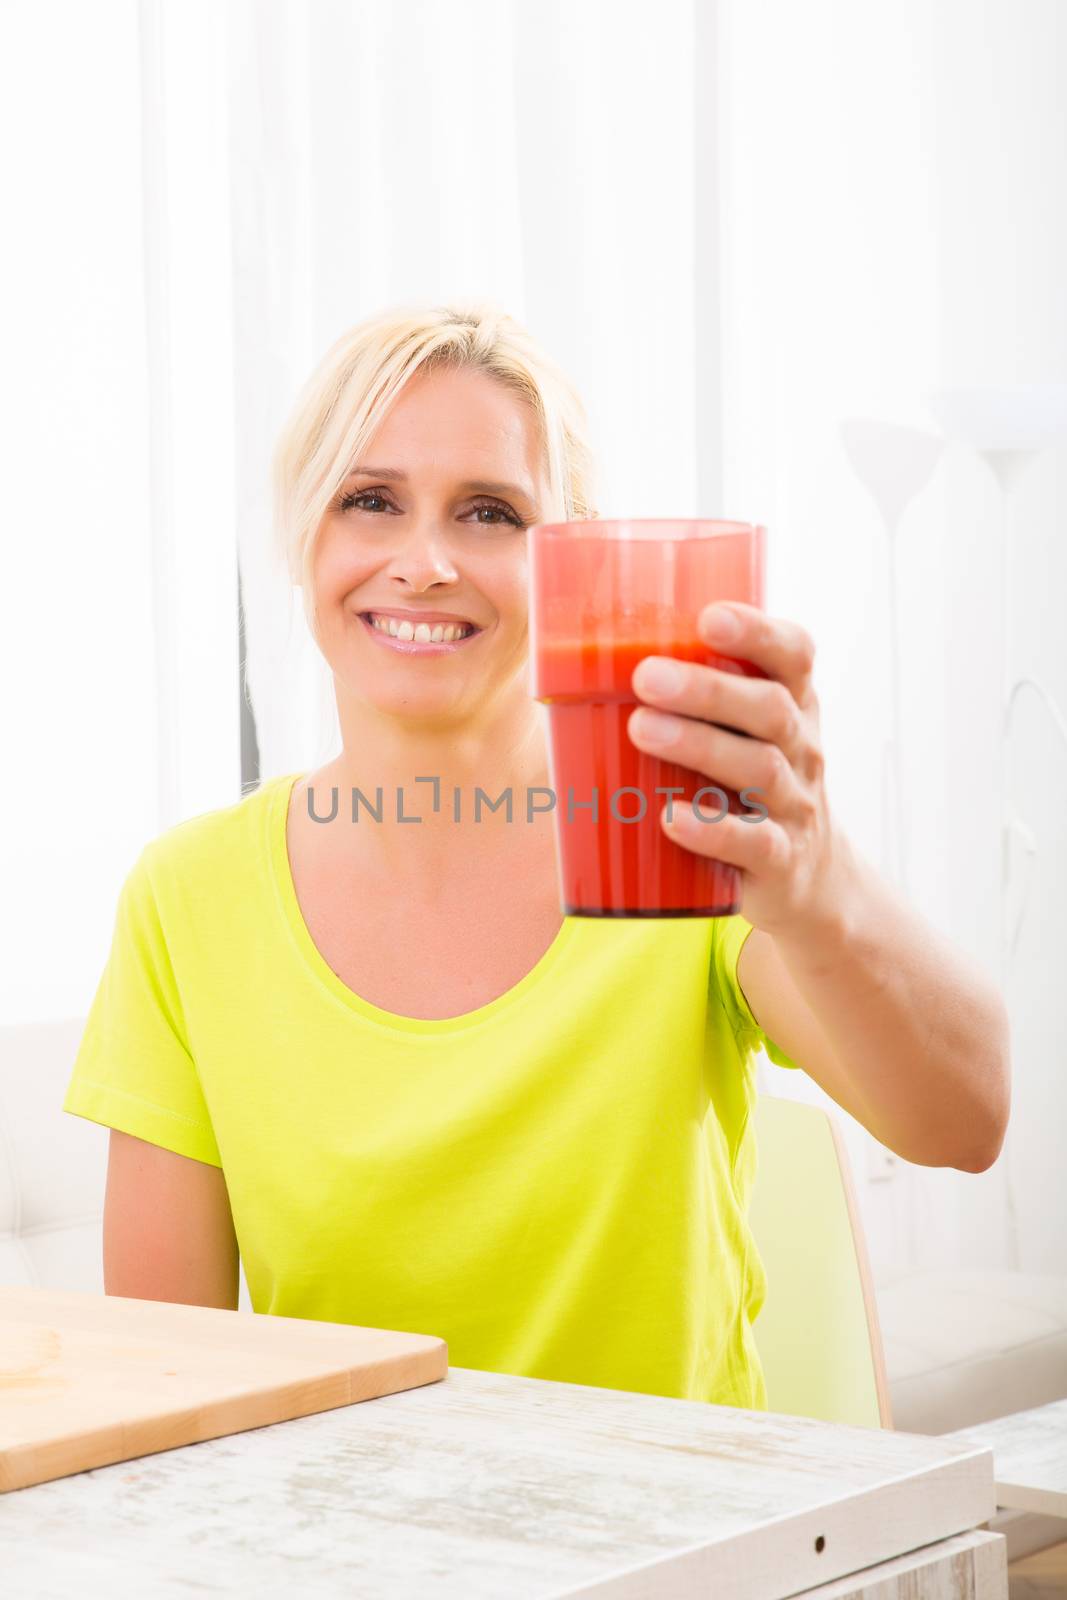 A beautiful mature woman enjoying a smoothie or juice with fruits in the kitchen.
